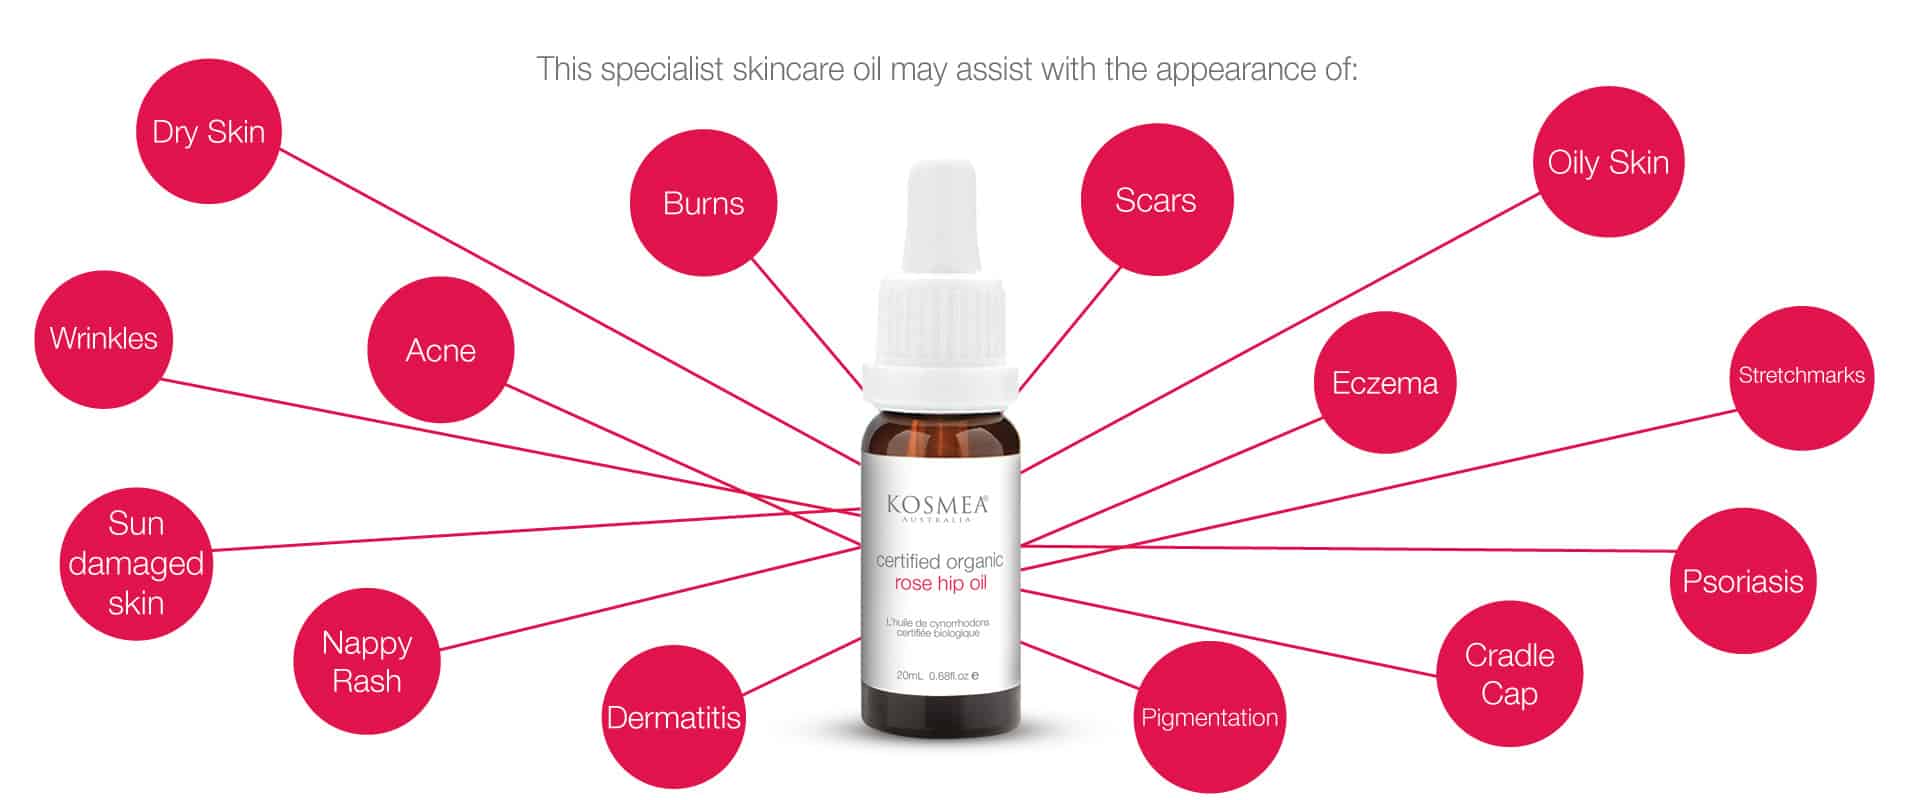 This specialist skincare oil helps with skin health